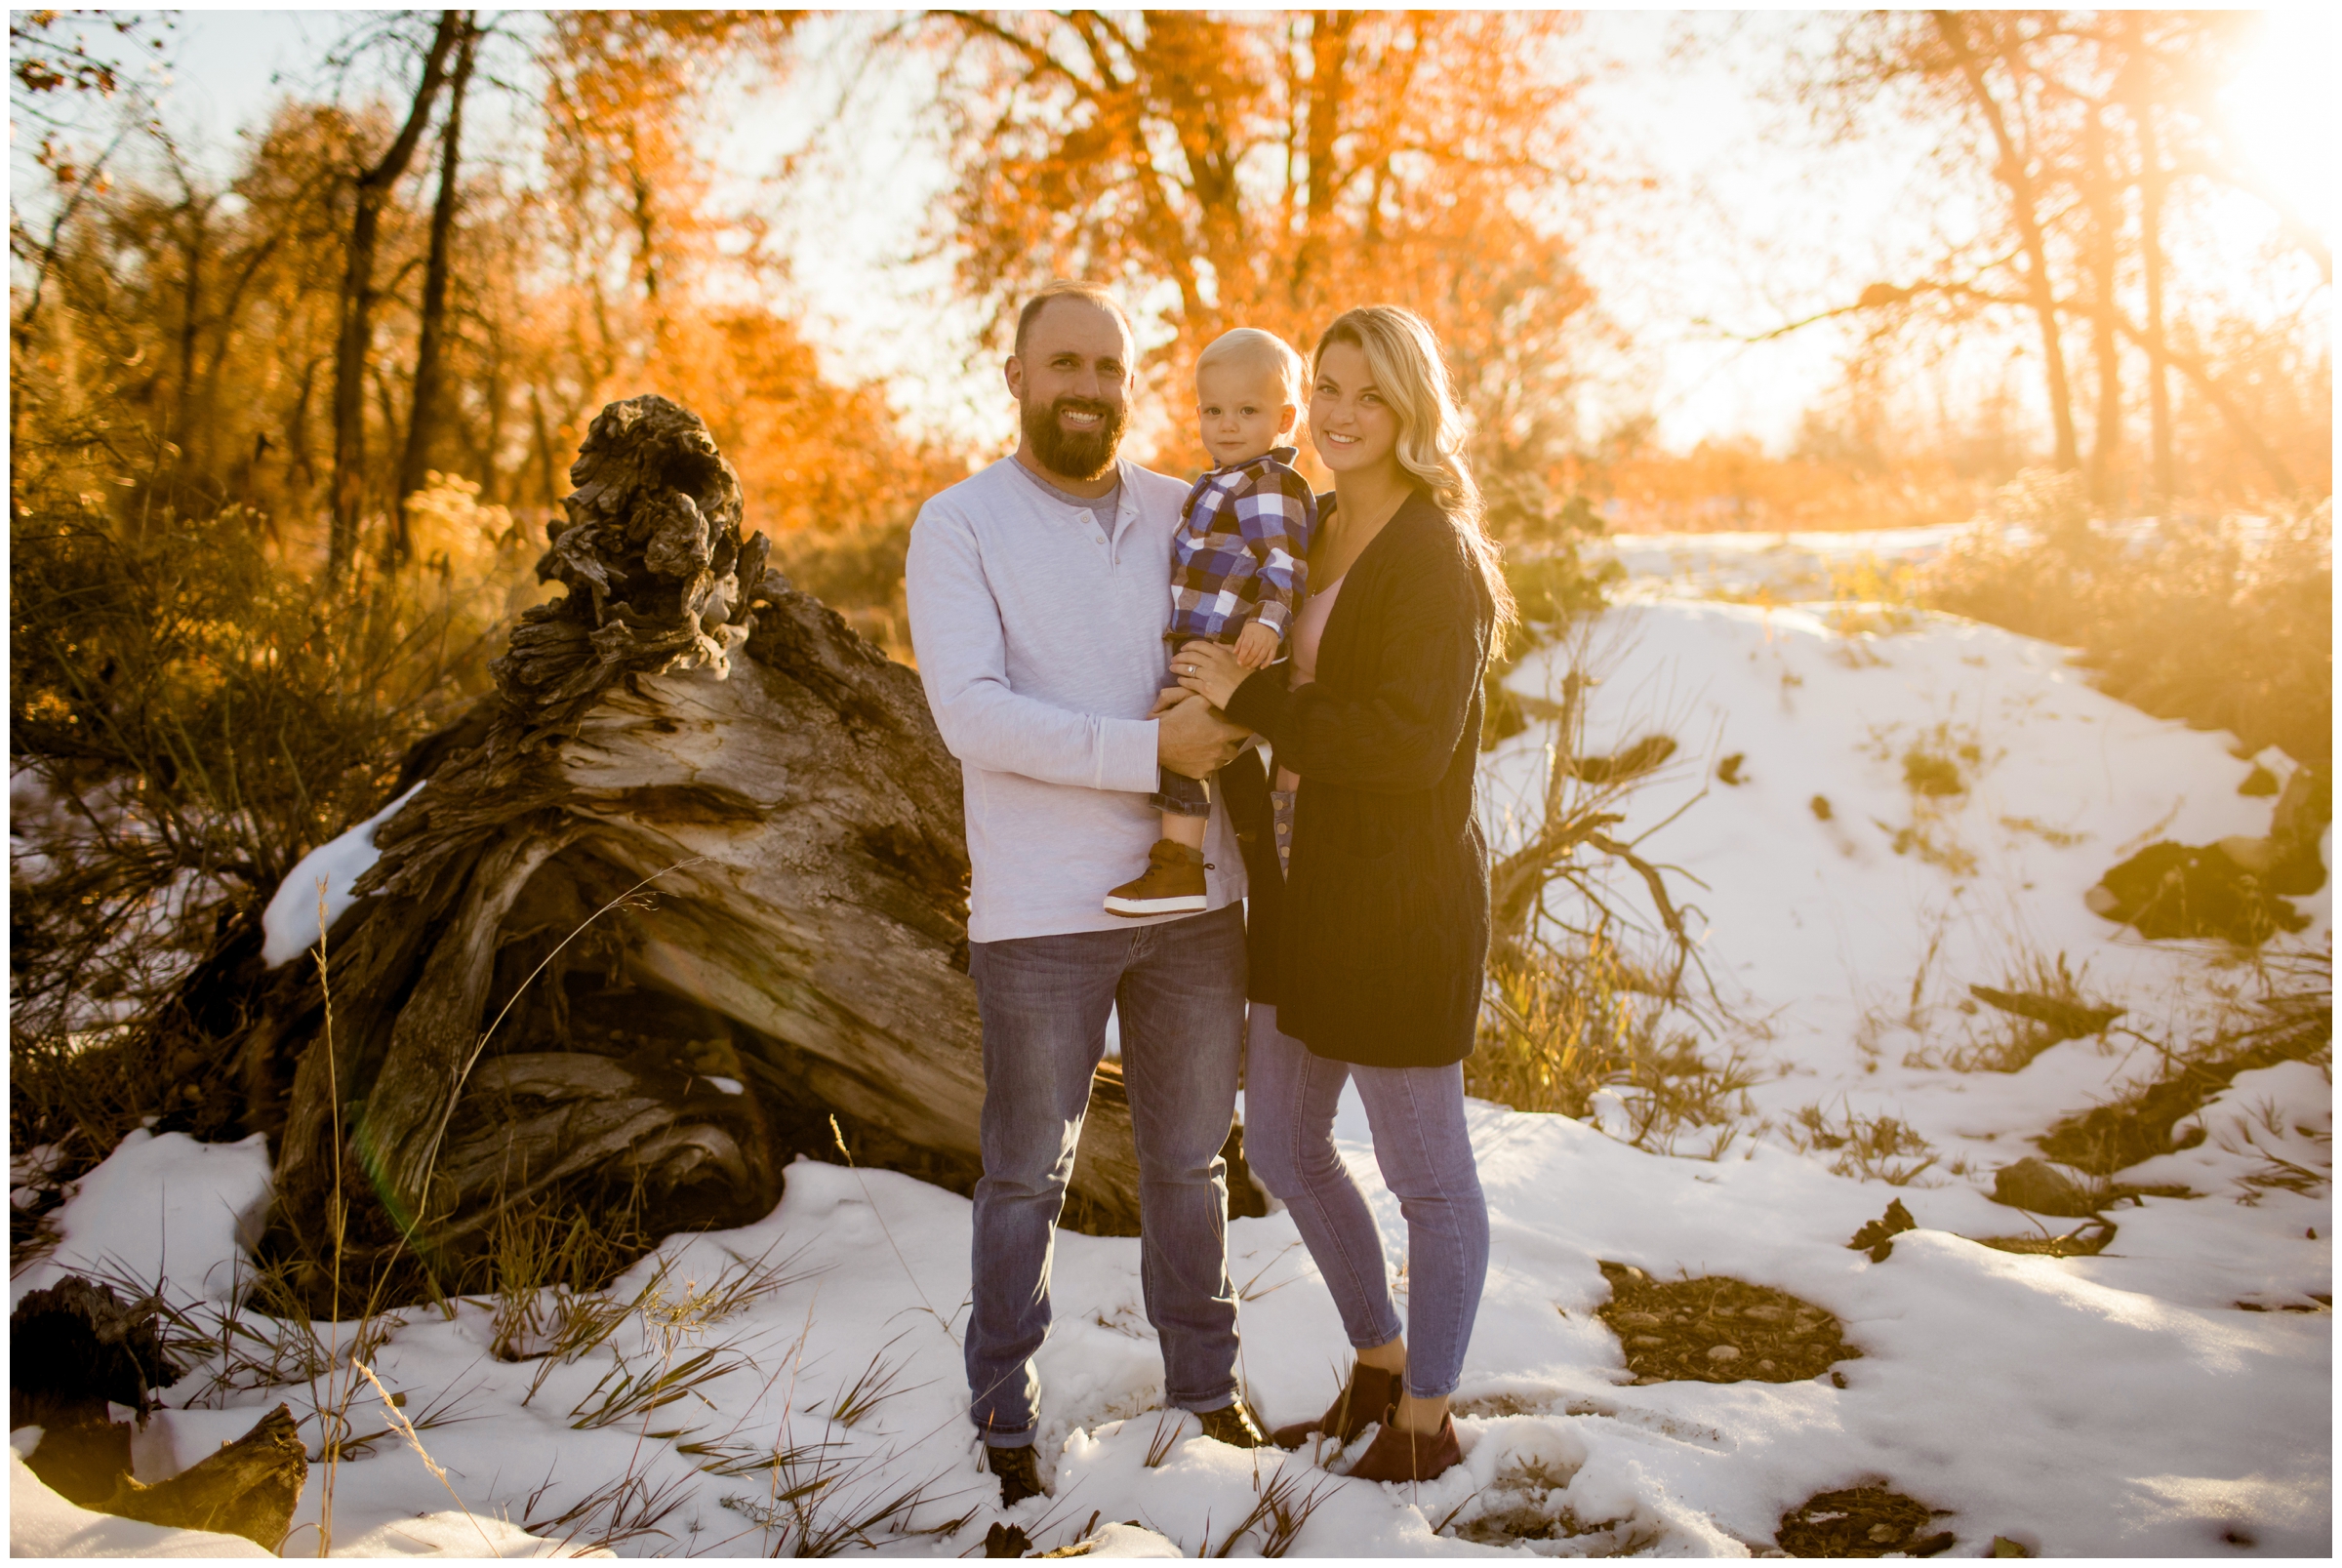 Colorado fall family photography session at Riverbend Ponds